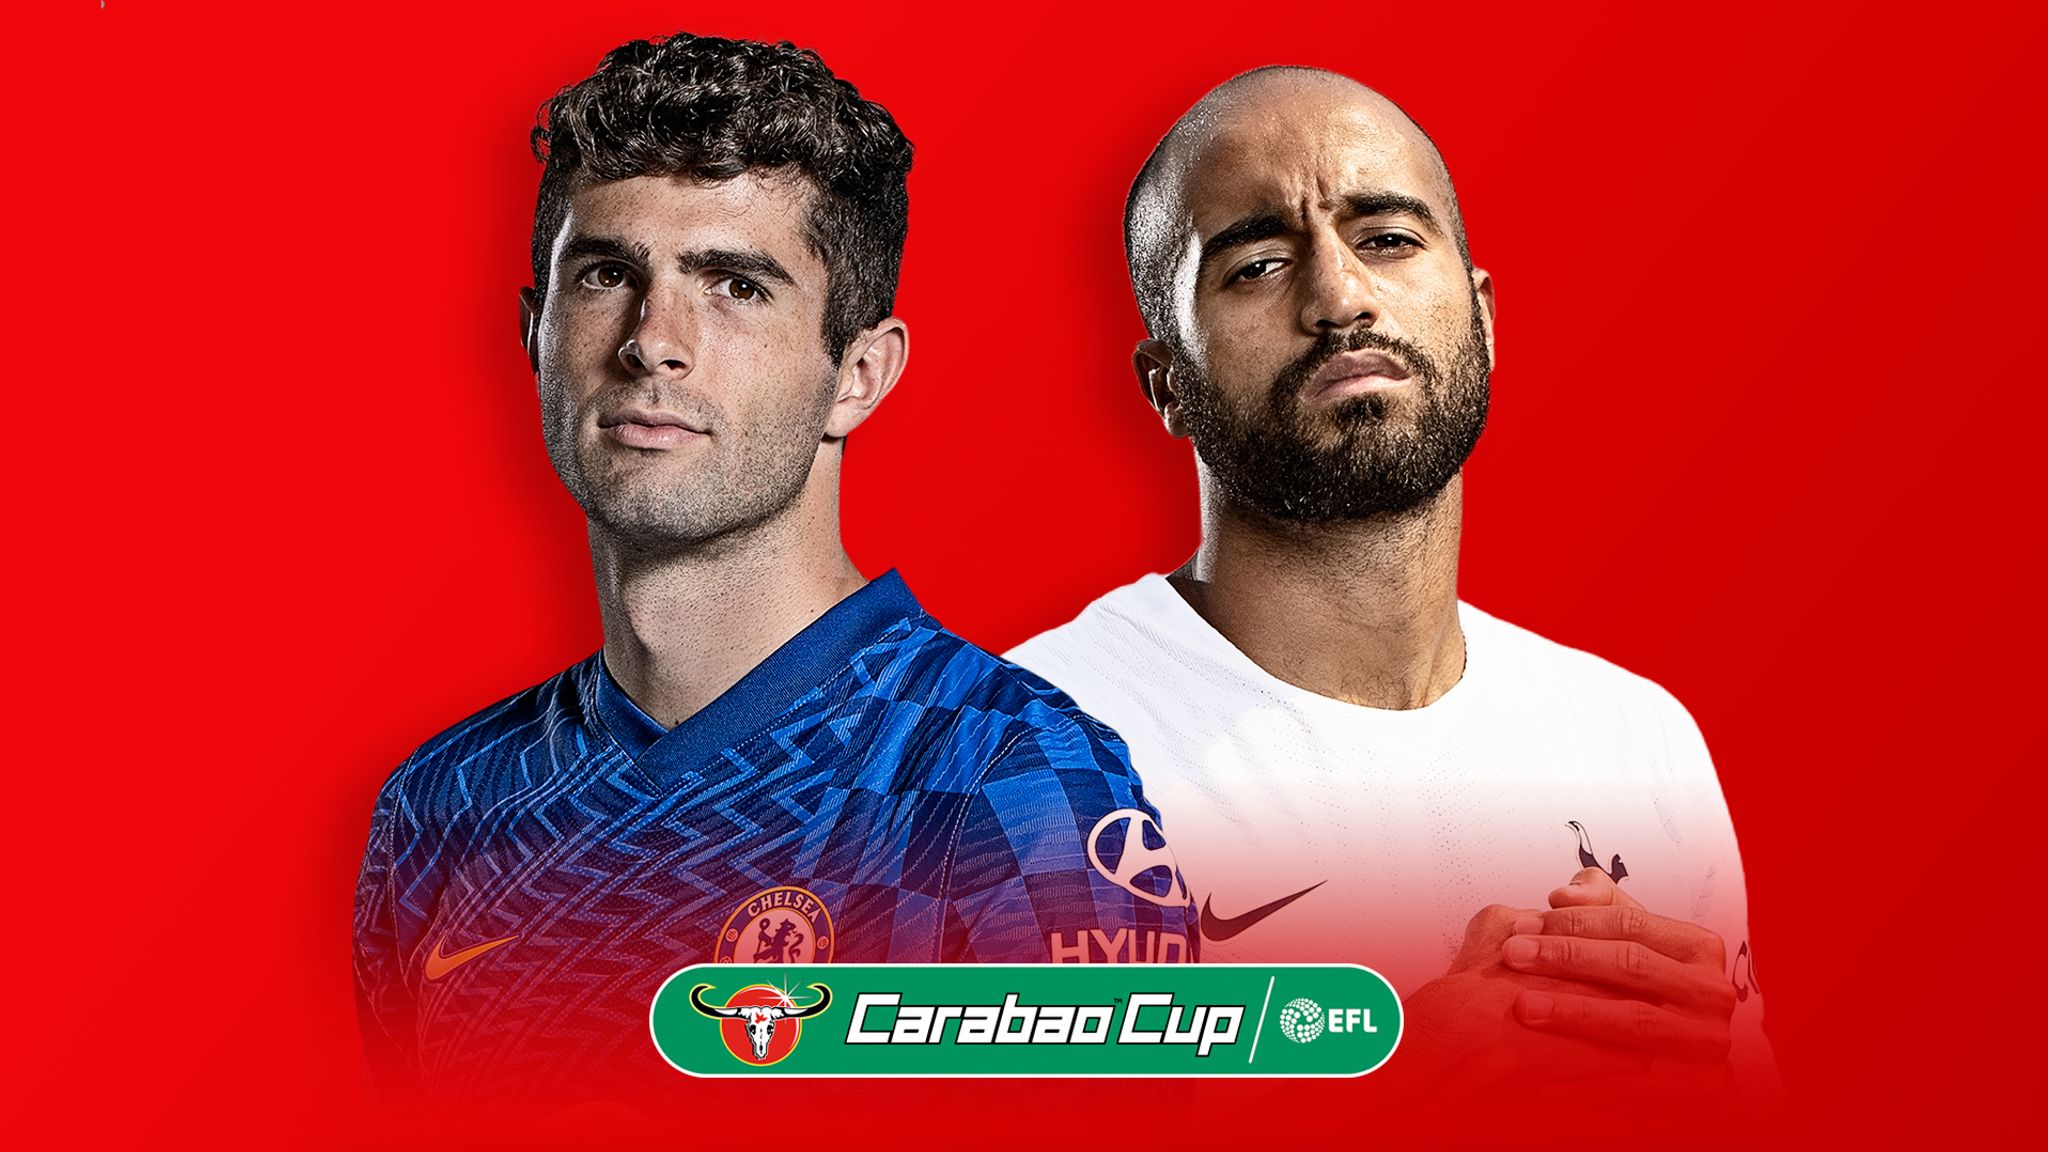 Chelsea vs Tottenham Carabao Cup semi-final preview, team news, stats, TV channel, kick-off time Football News Sky Sports